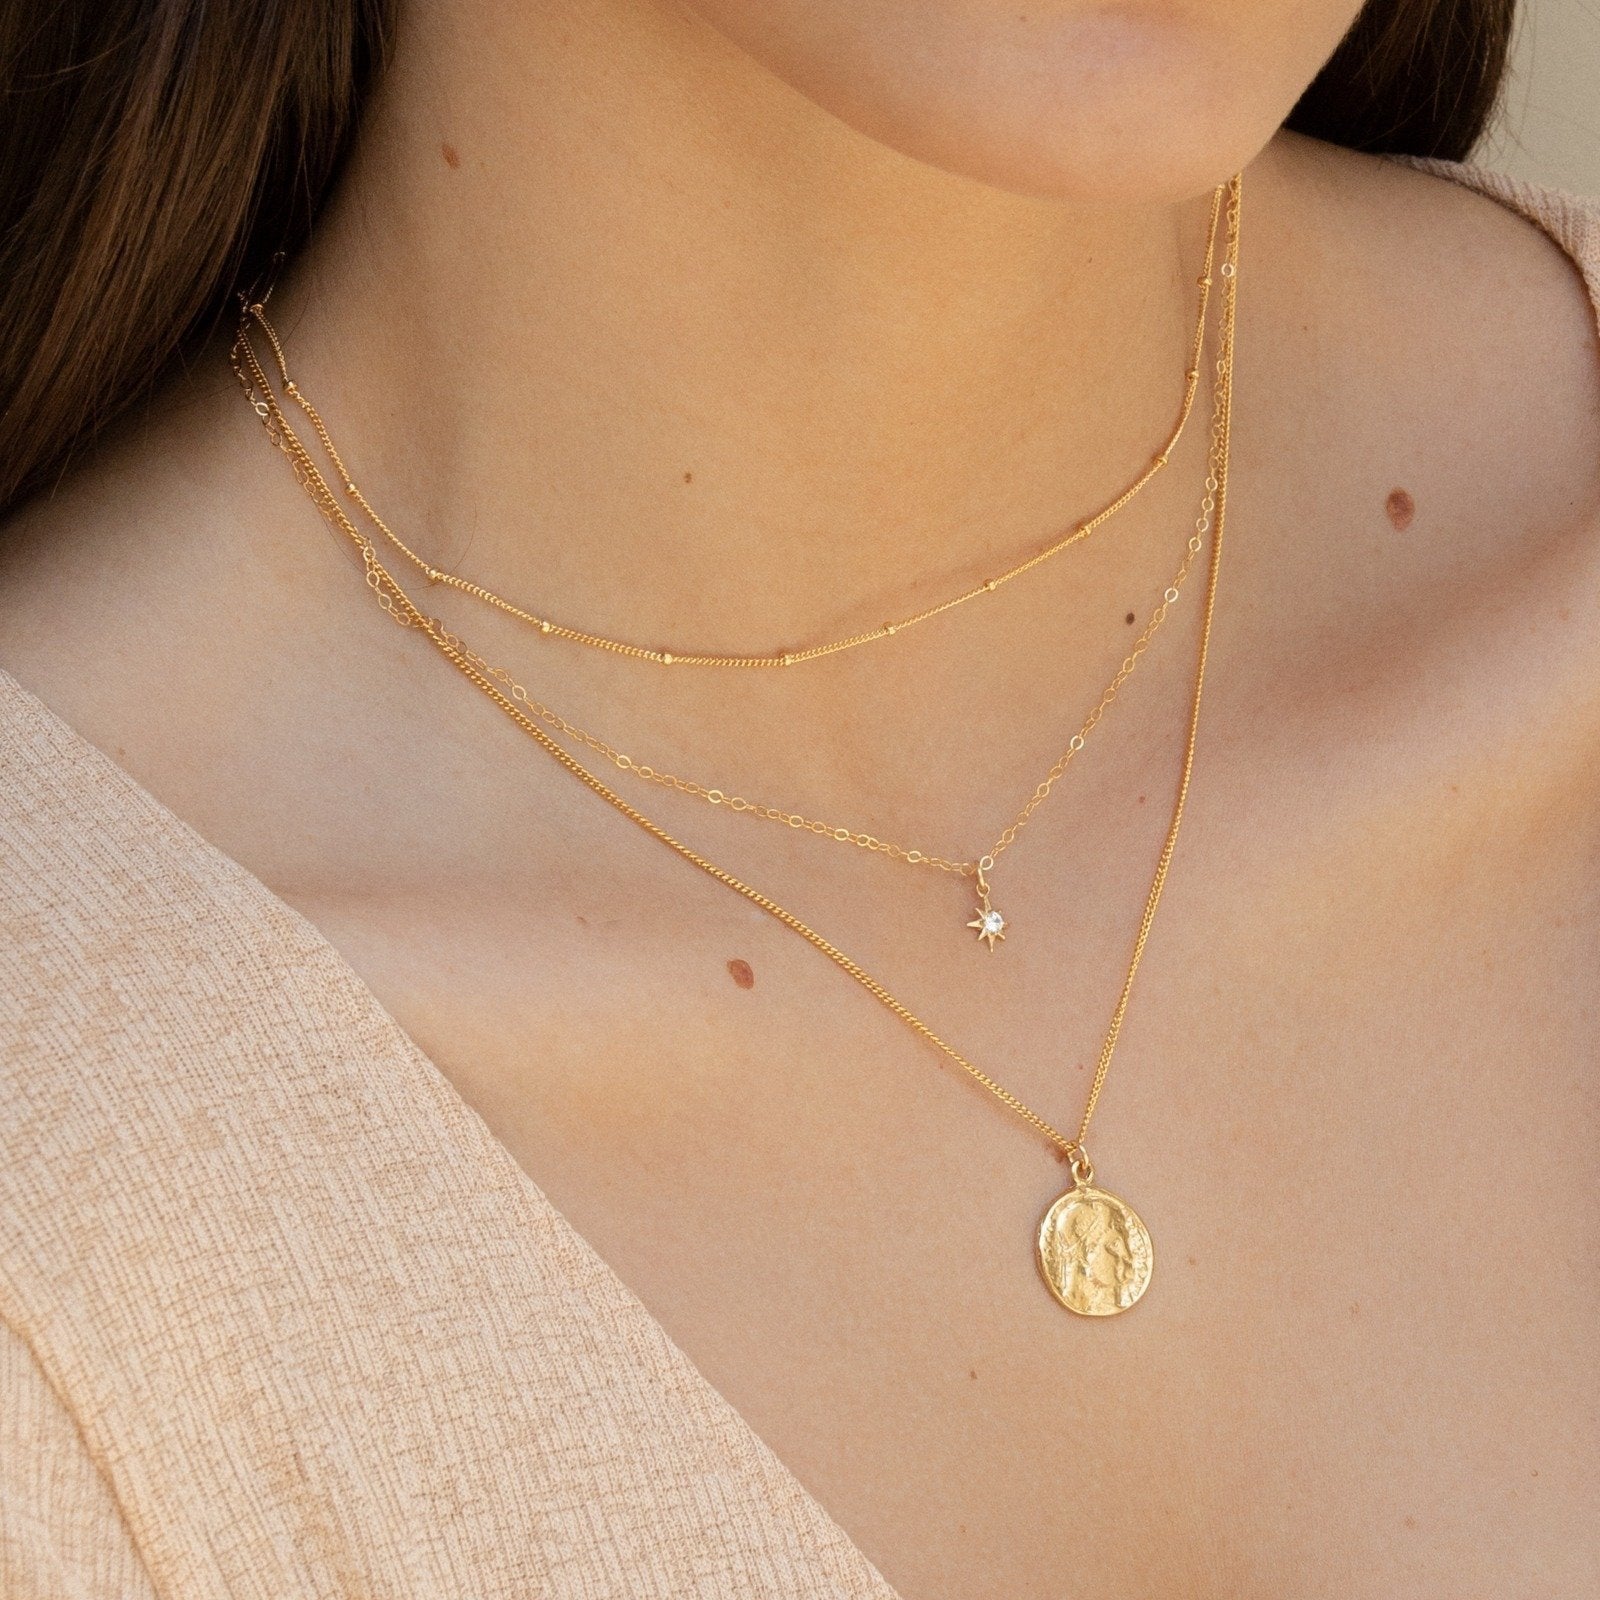 How to Layer Necklaces, According to a Stylist